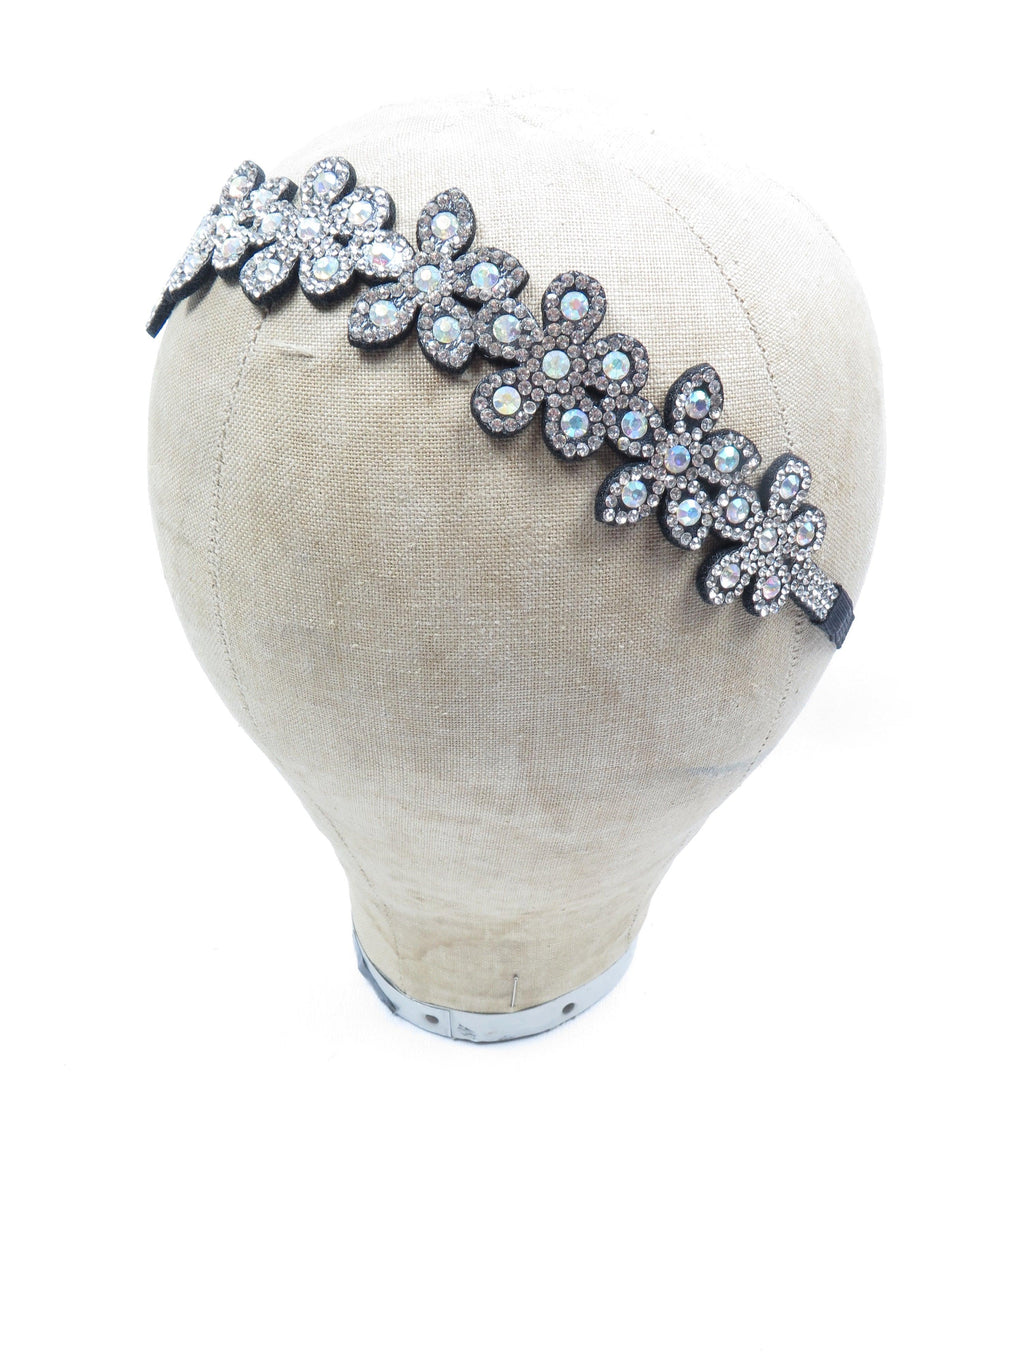 Sequin & Diamanté Floral 1920s Style Motif Hairband Head piece New - The Harlequin